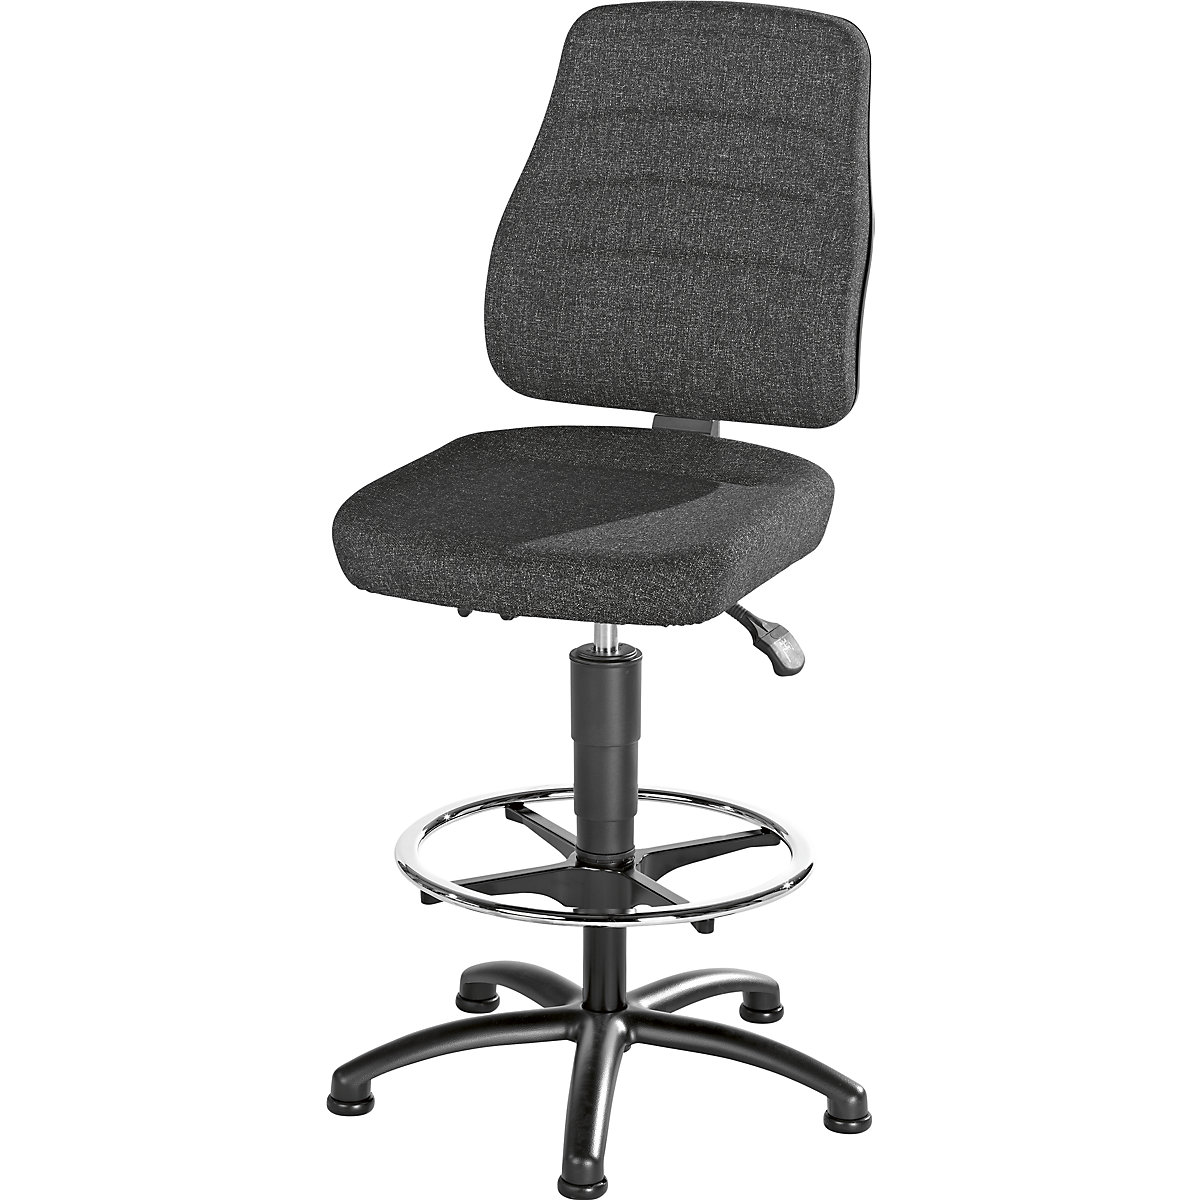 Industrial swivel chair – eurokraft pro, fabric cover, with floor glides and foot ring-4